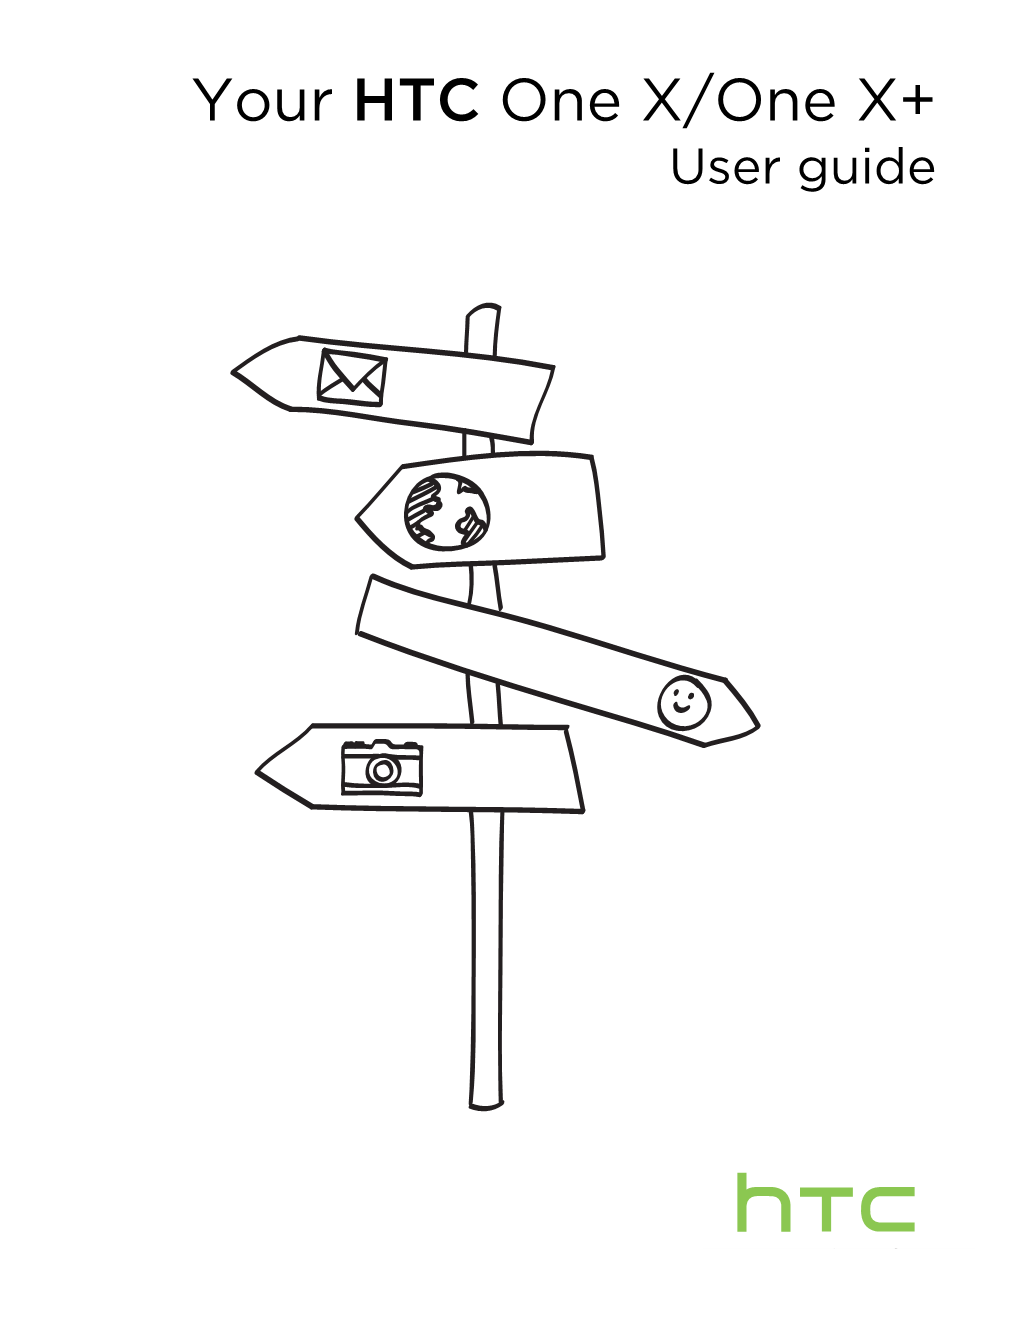 Your HTC One X/One X+ User Guide 2 Contents Contents